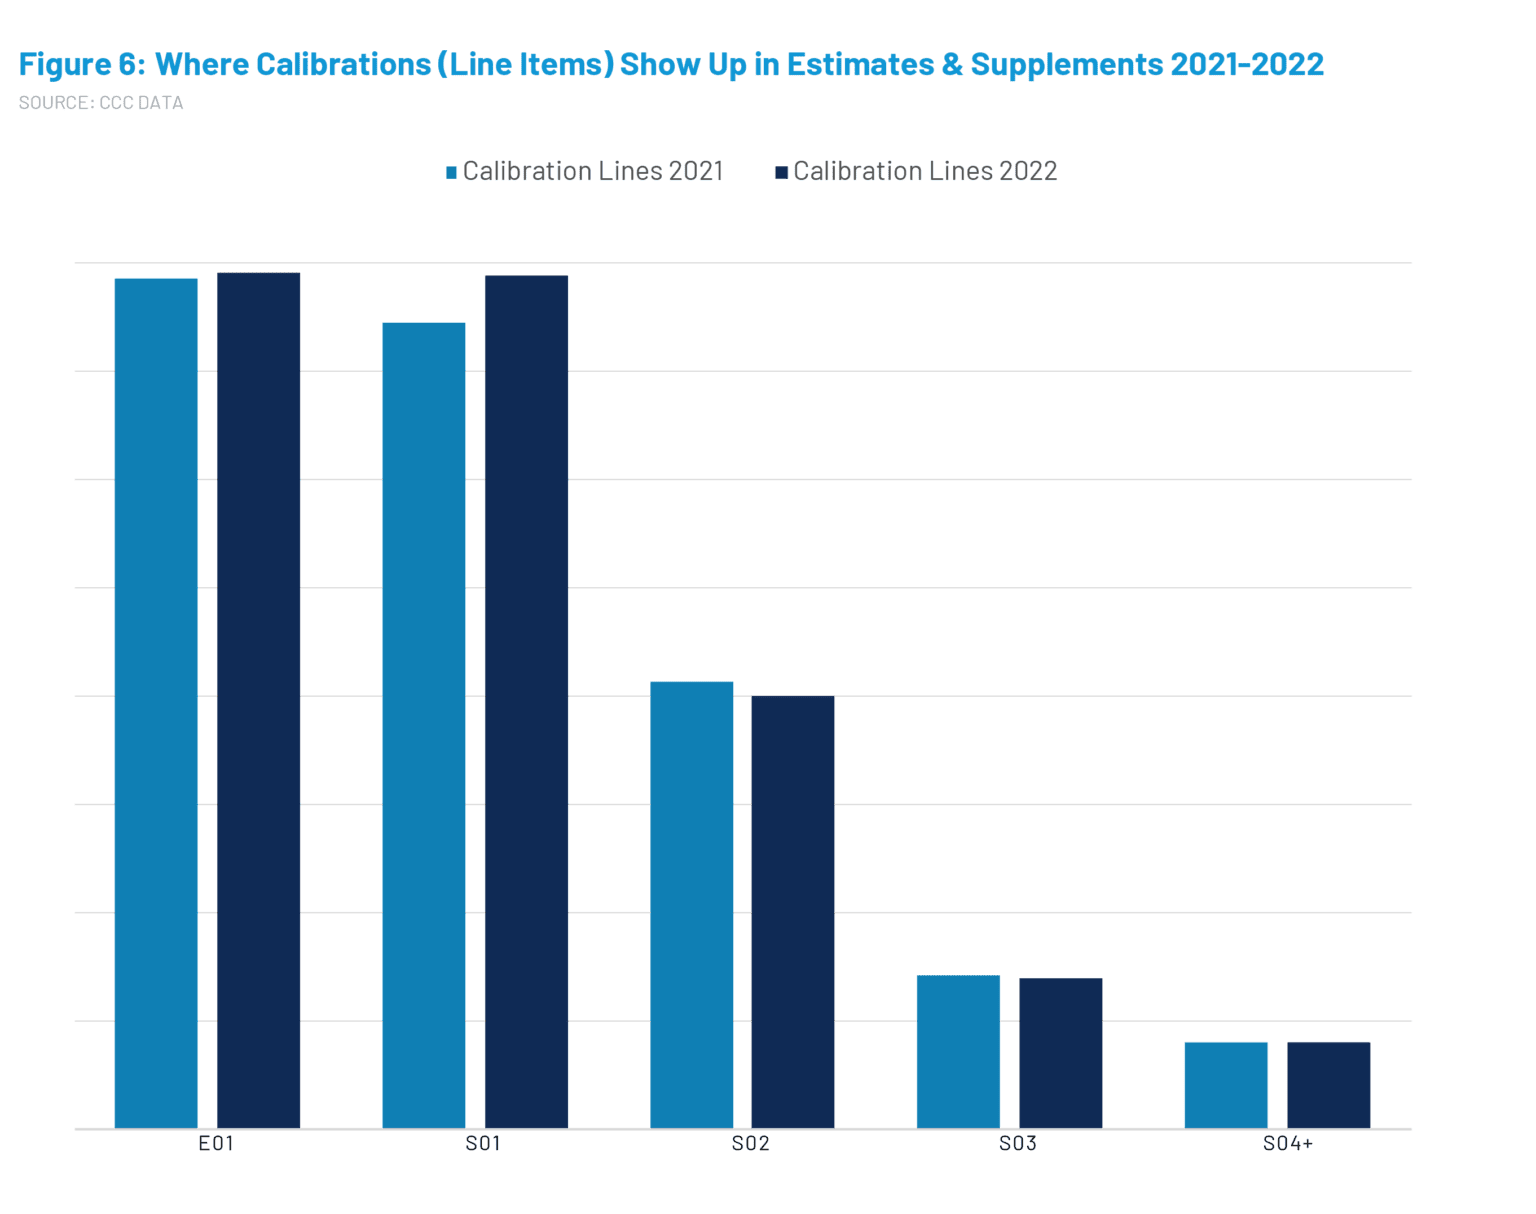 Chart showing where calibrations show up in estimates and supplements 2021-2022